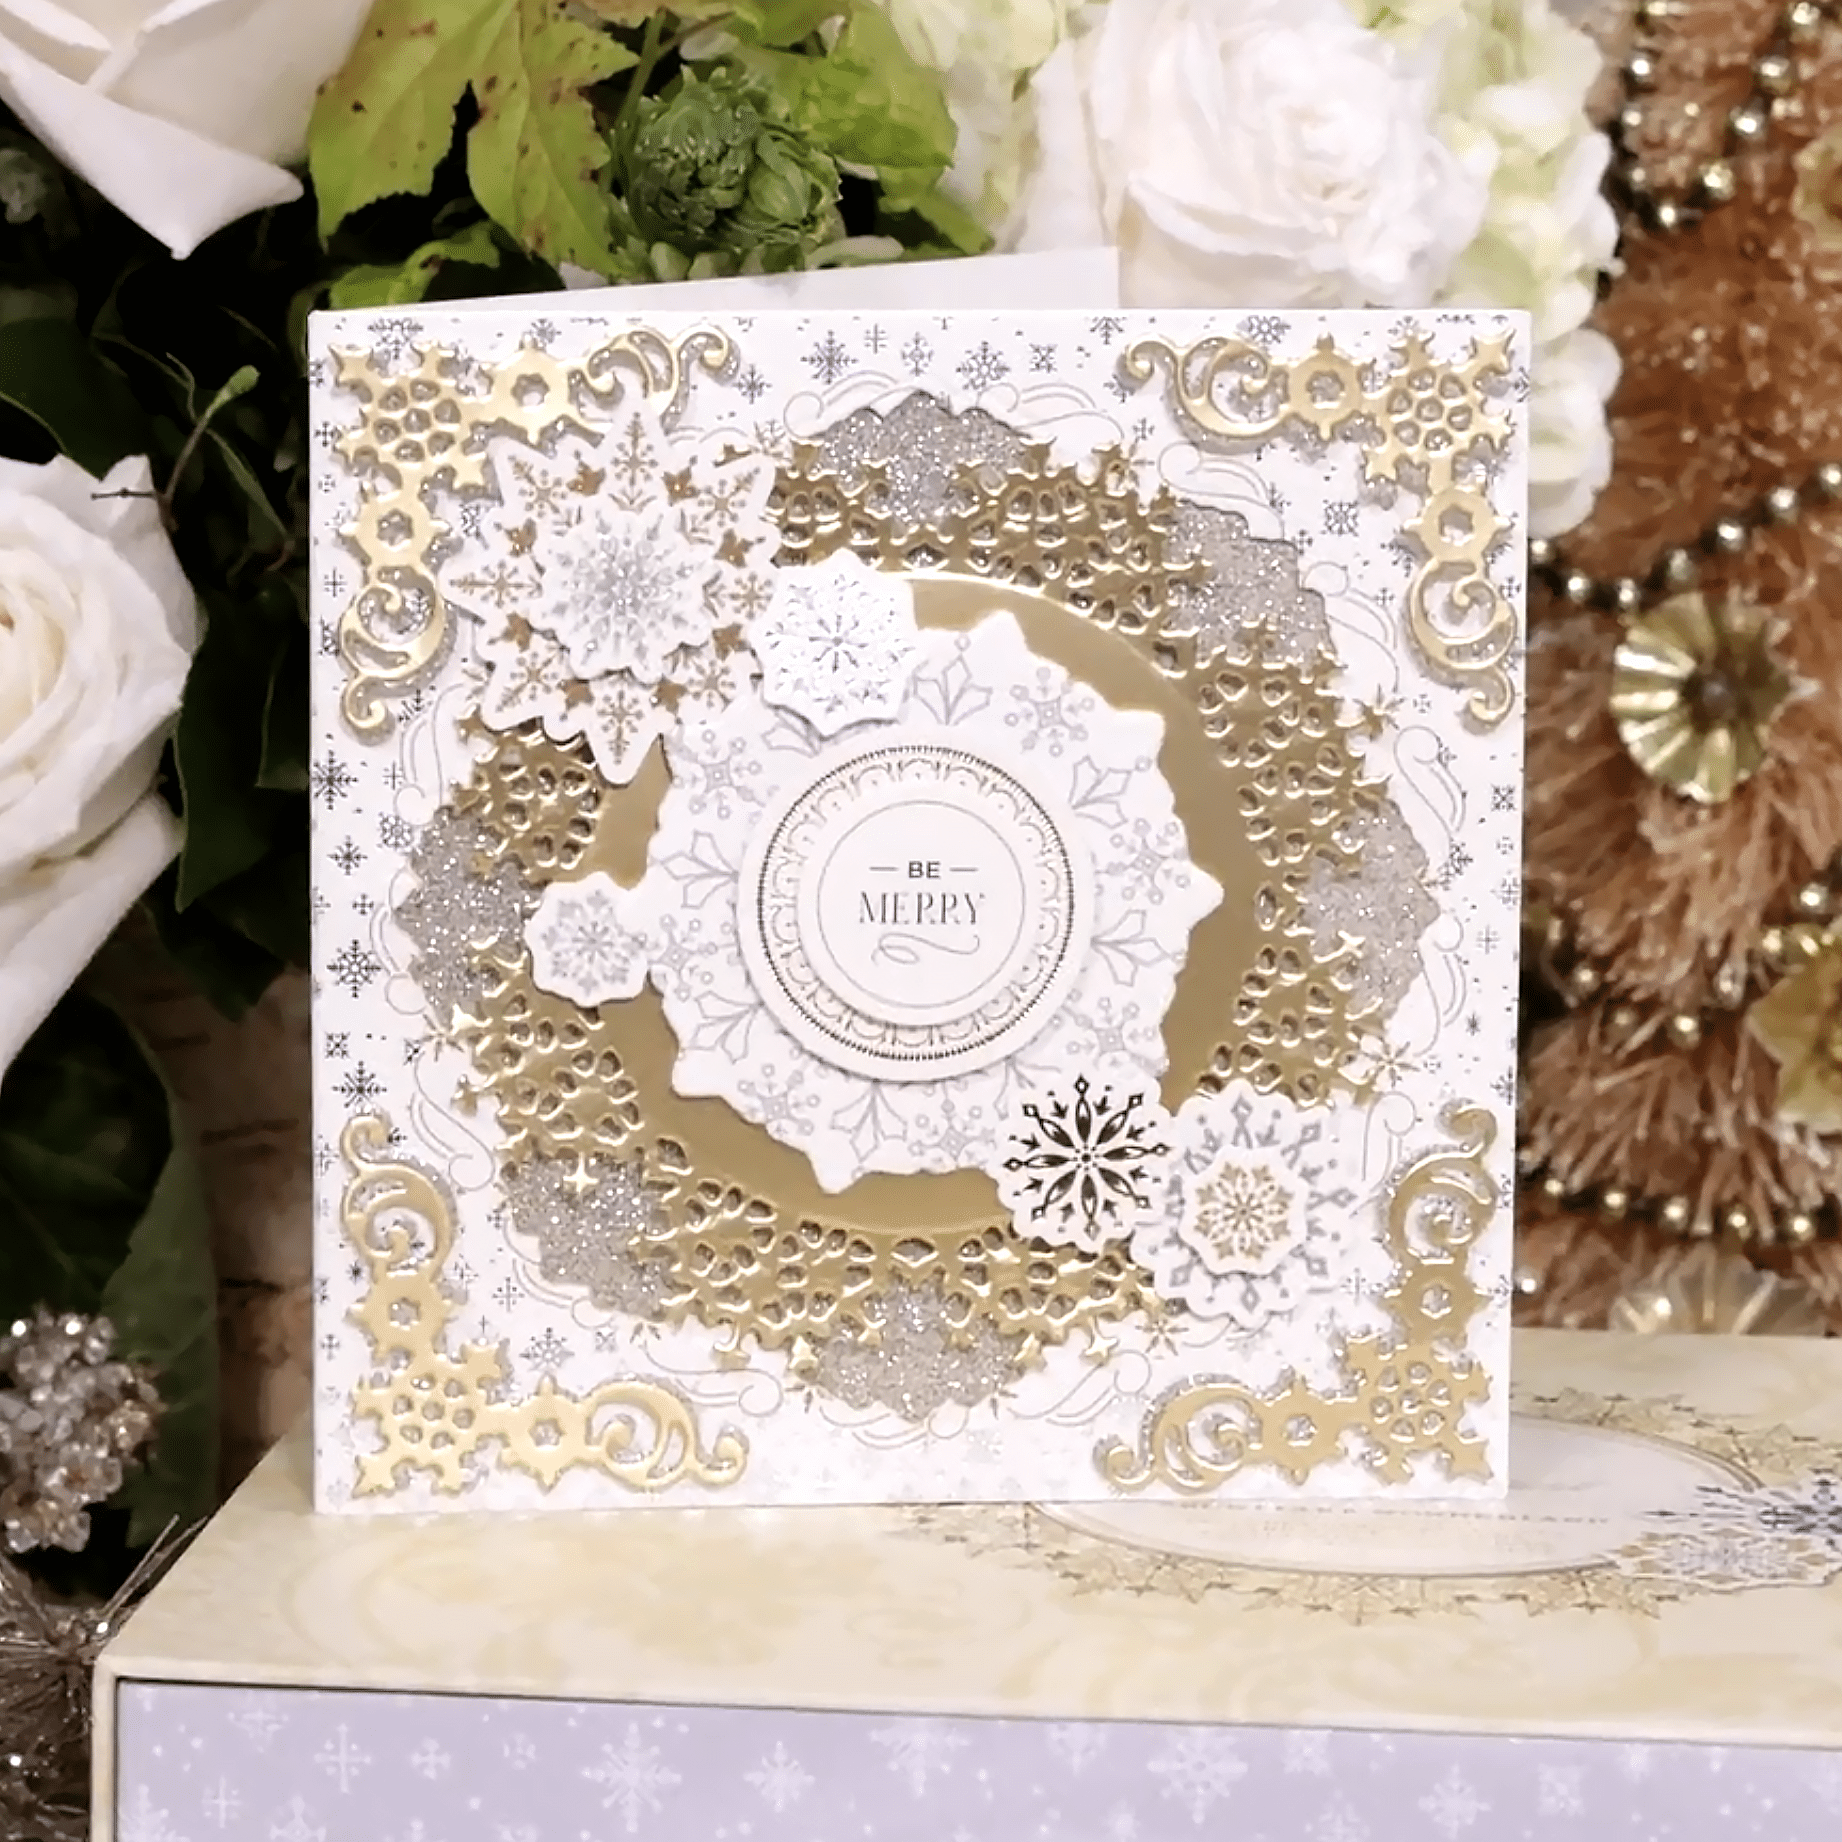 a close up of a card on a table.